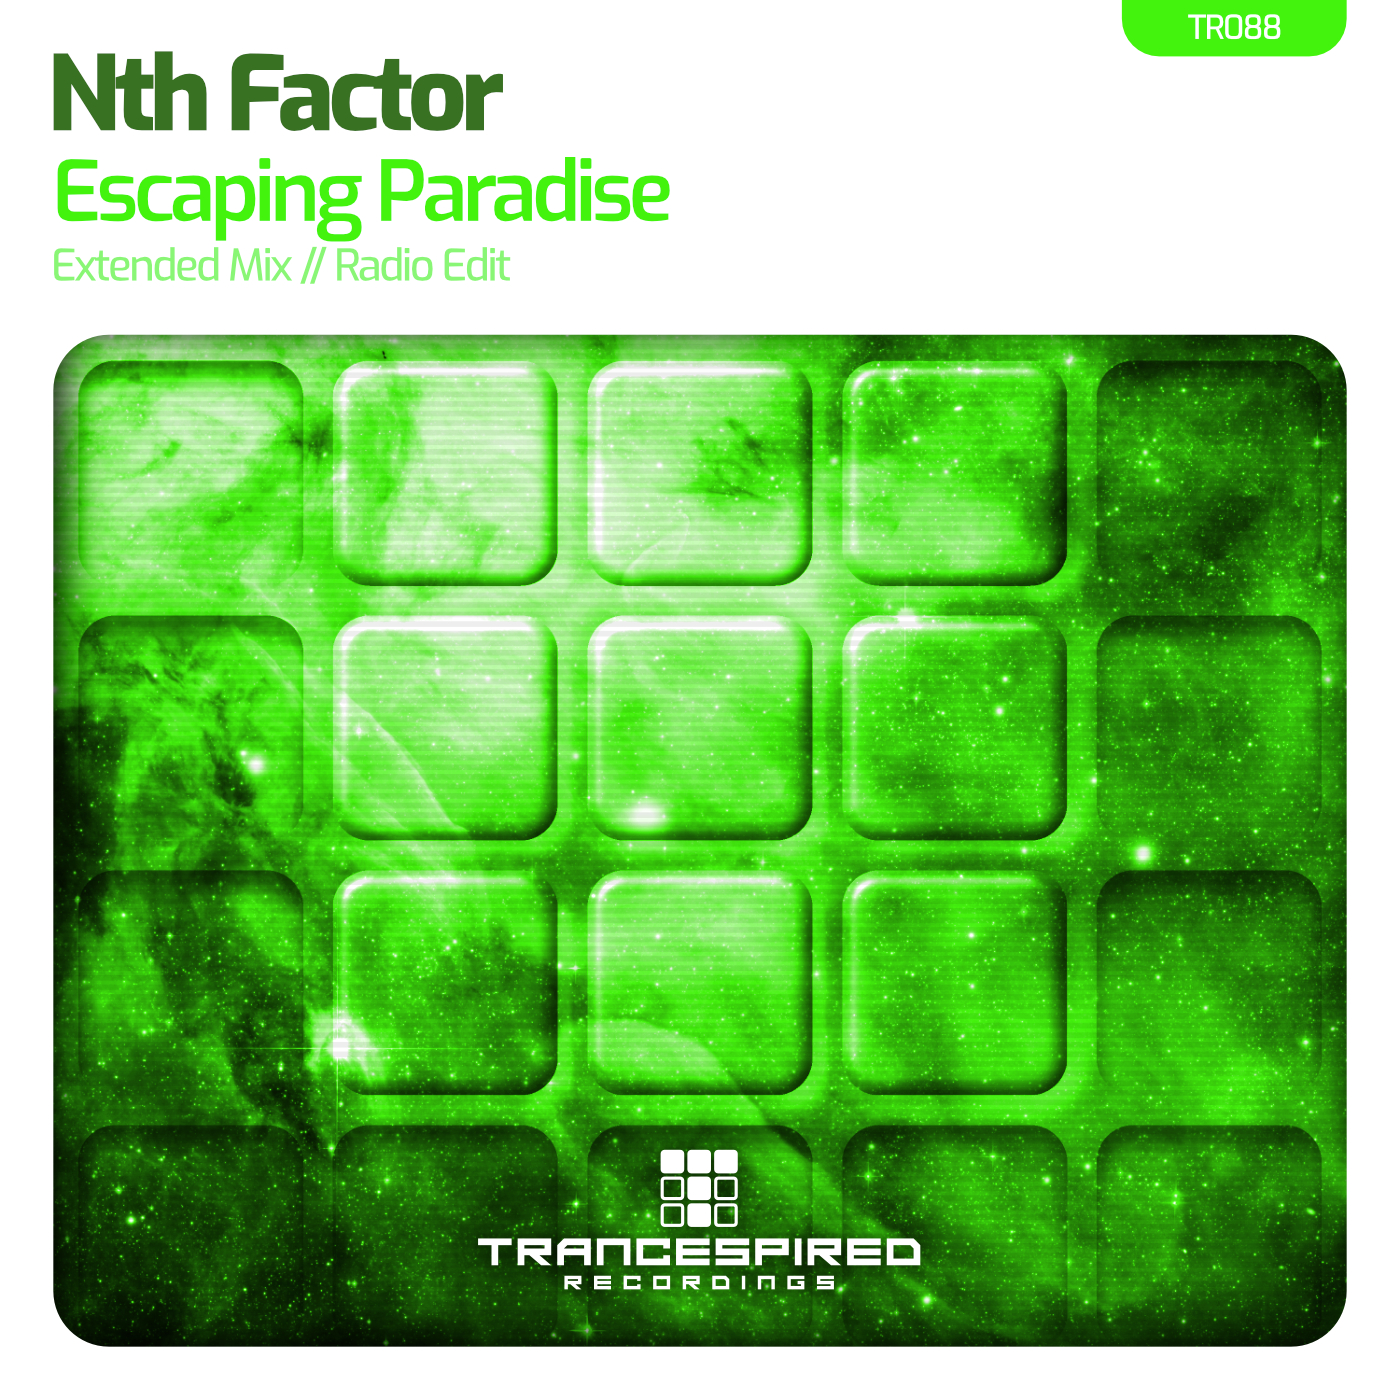 Nth Factor presents Escaping Paradise on Trancespired Recordings